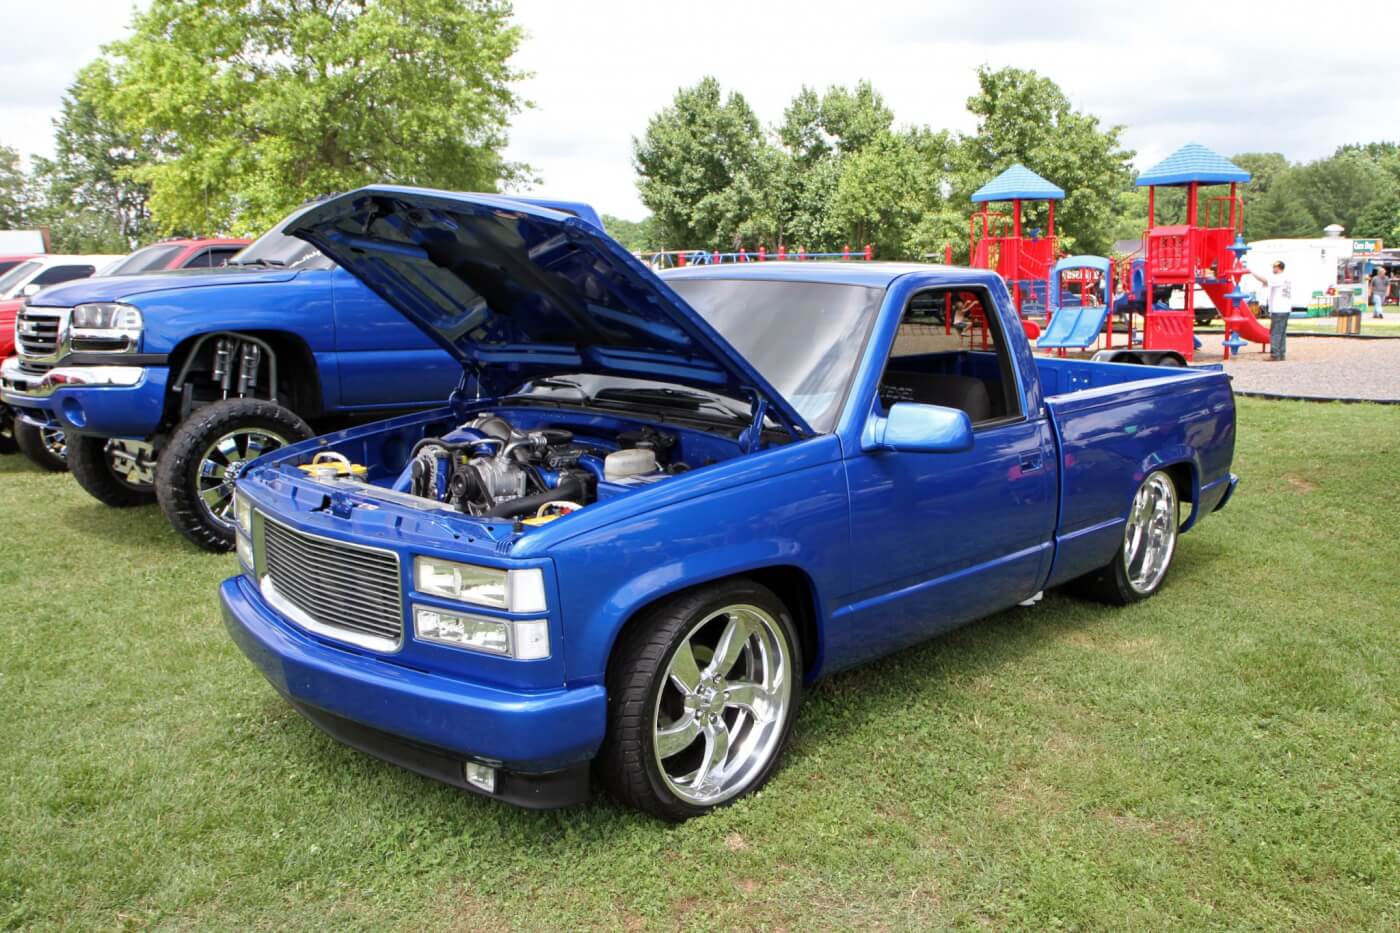 One of our favorites was Jay Byrn’s sweet-looking Chevrolet regular cab 1500 short bed with a Duramax stuffed under the hood and backed by an Allison transmission. The sport truck had great attention to detail and a very clean diesel swap earning it the Best GM award.